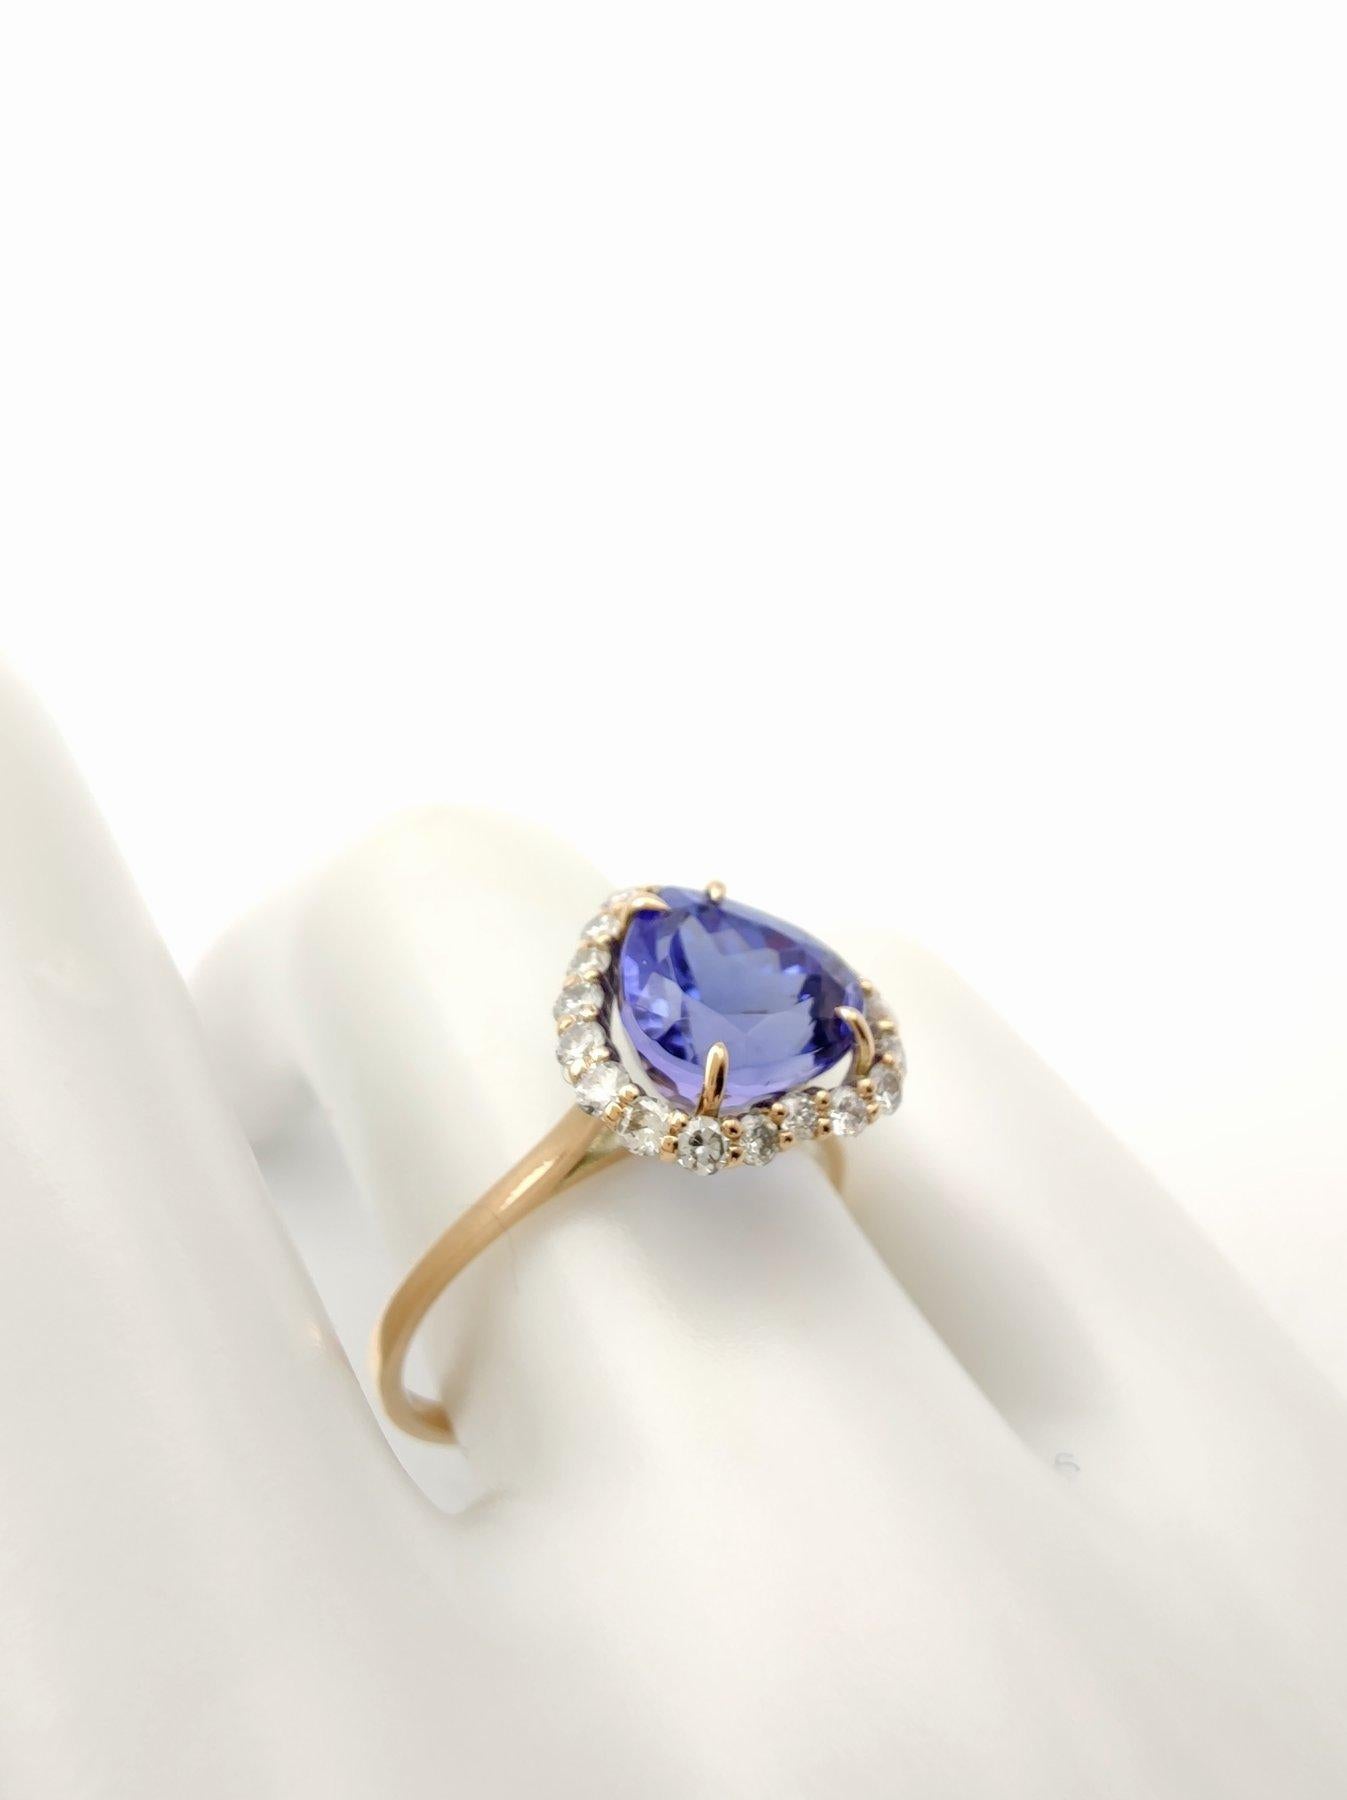 Contemporary 14 karat Gold - Tanzanite Ring  Diamonds, for weddings, engagements, proposals For Sale